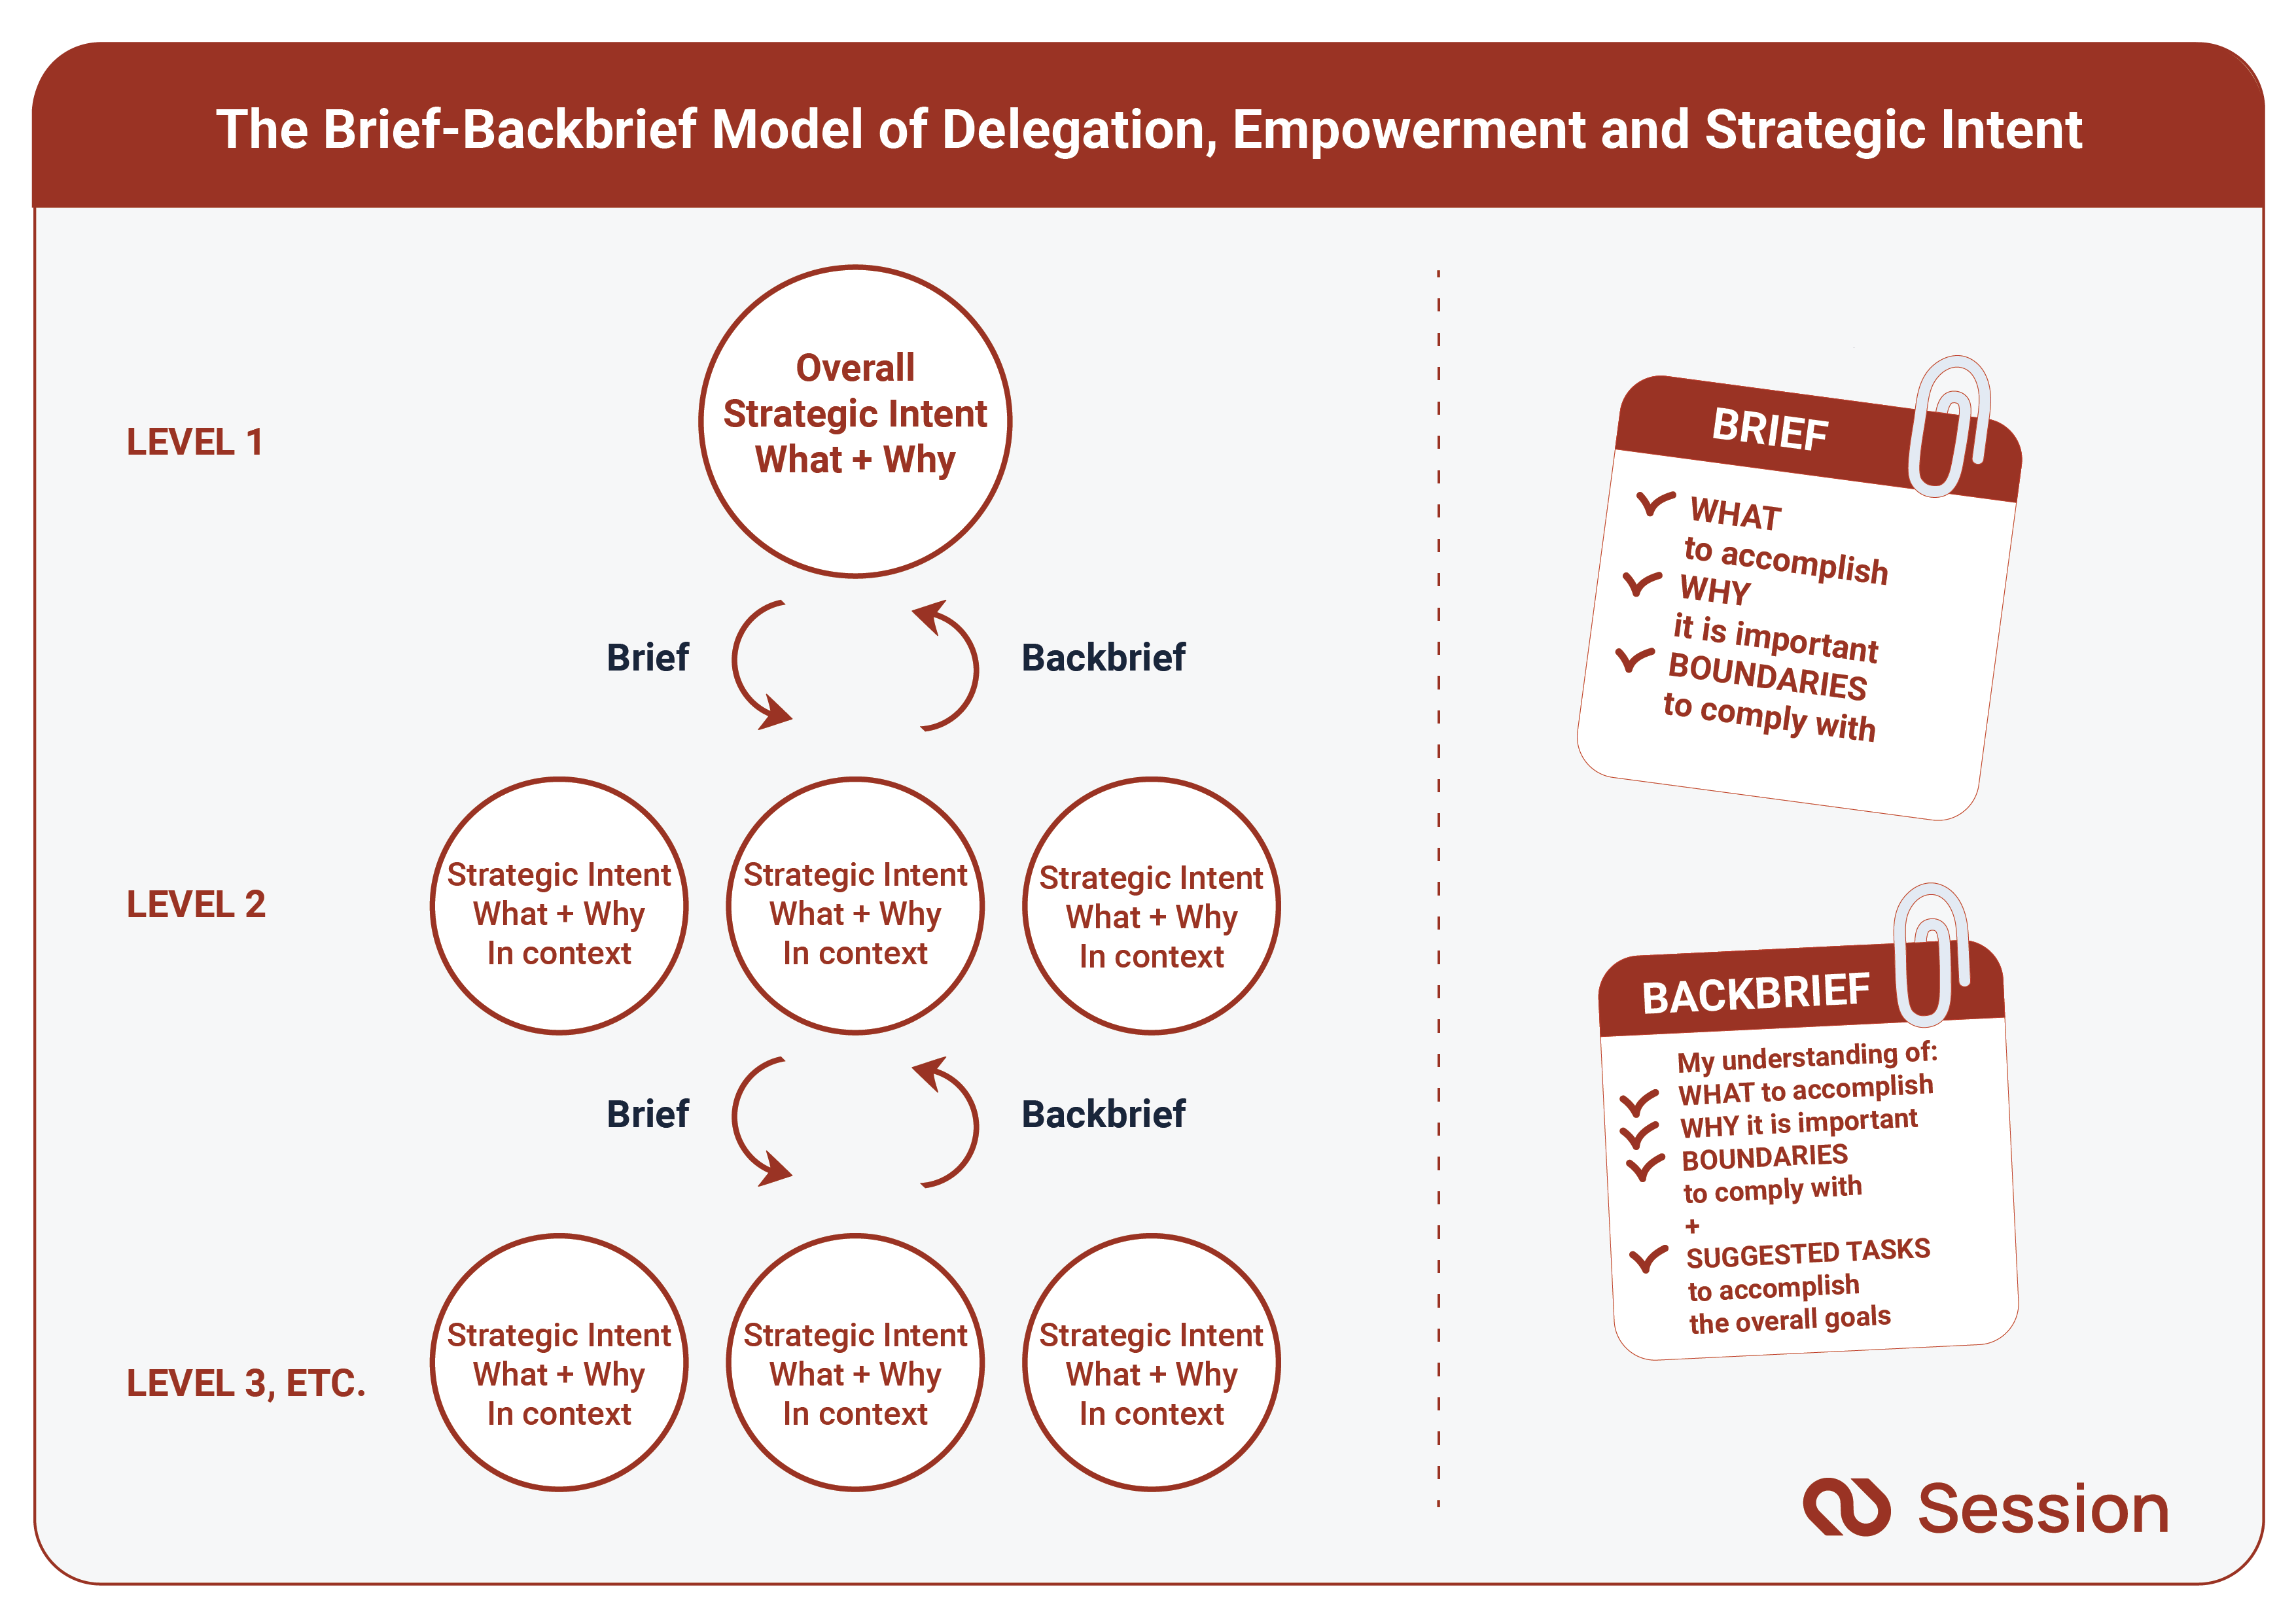 The Brief-Backbrief Model of Delegation, Empowerment and Strategic Intent